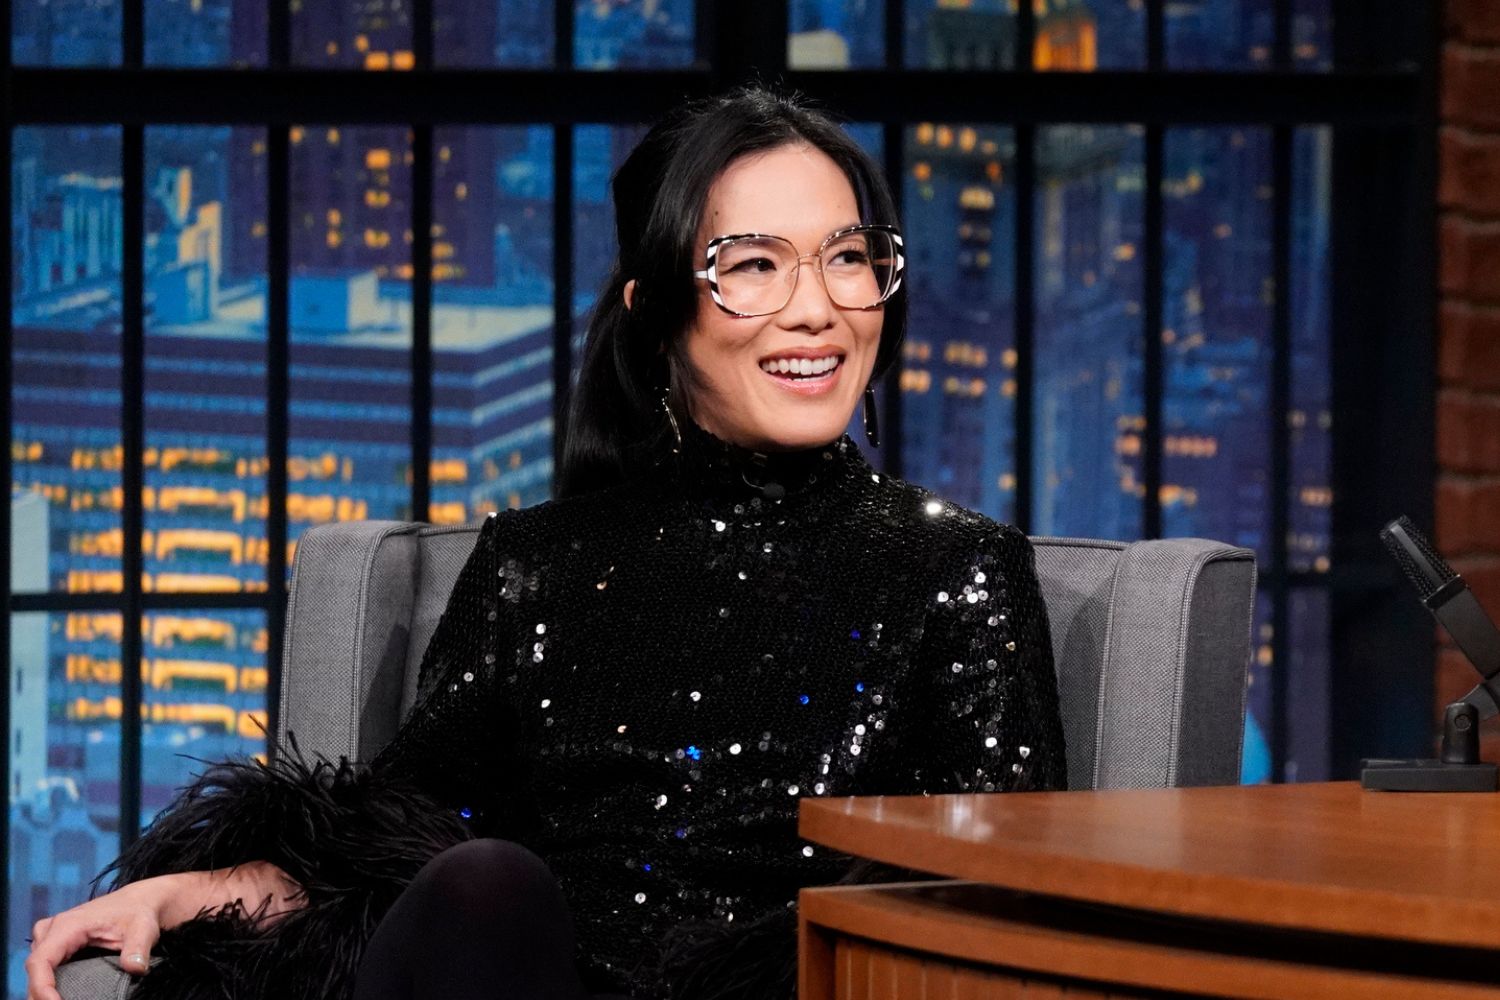 ali-wong-in-black-sequined-dress-on-talk-show-couch